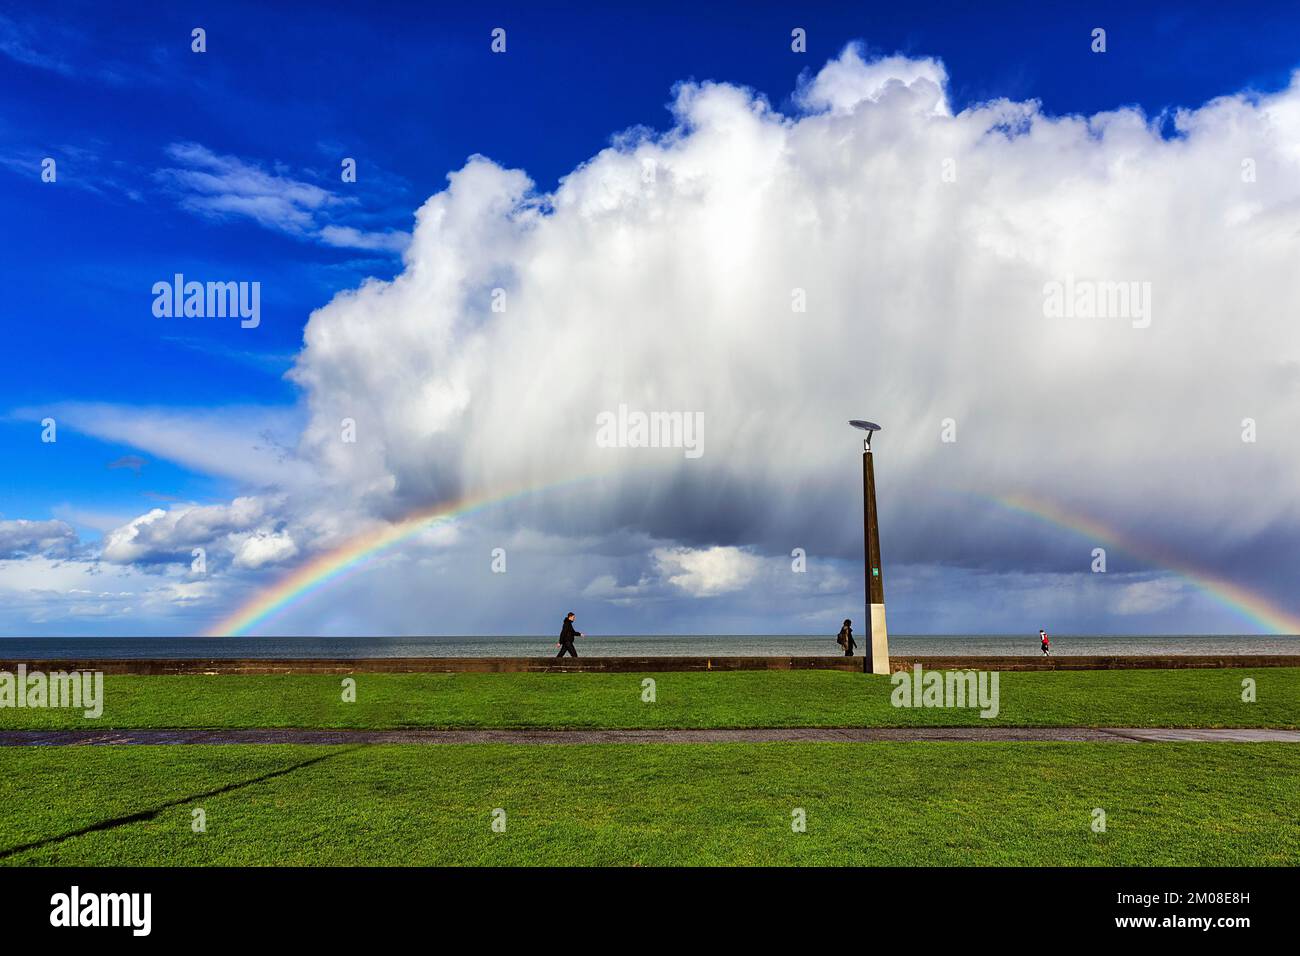 Pedestrians on seafront, dramatic cloudy sky with rainbow, Bray, Wicklow, Ireland, Europe Stock Photo